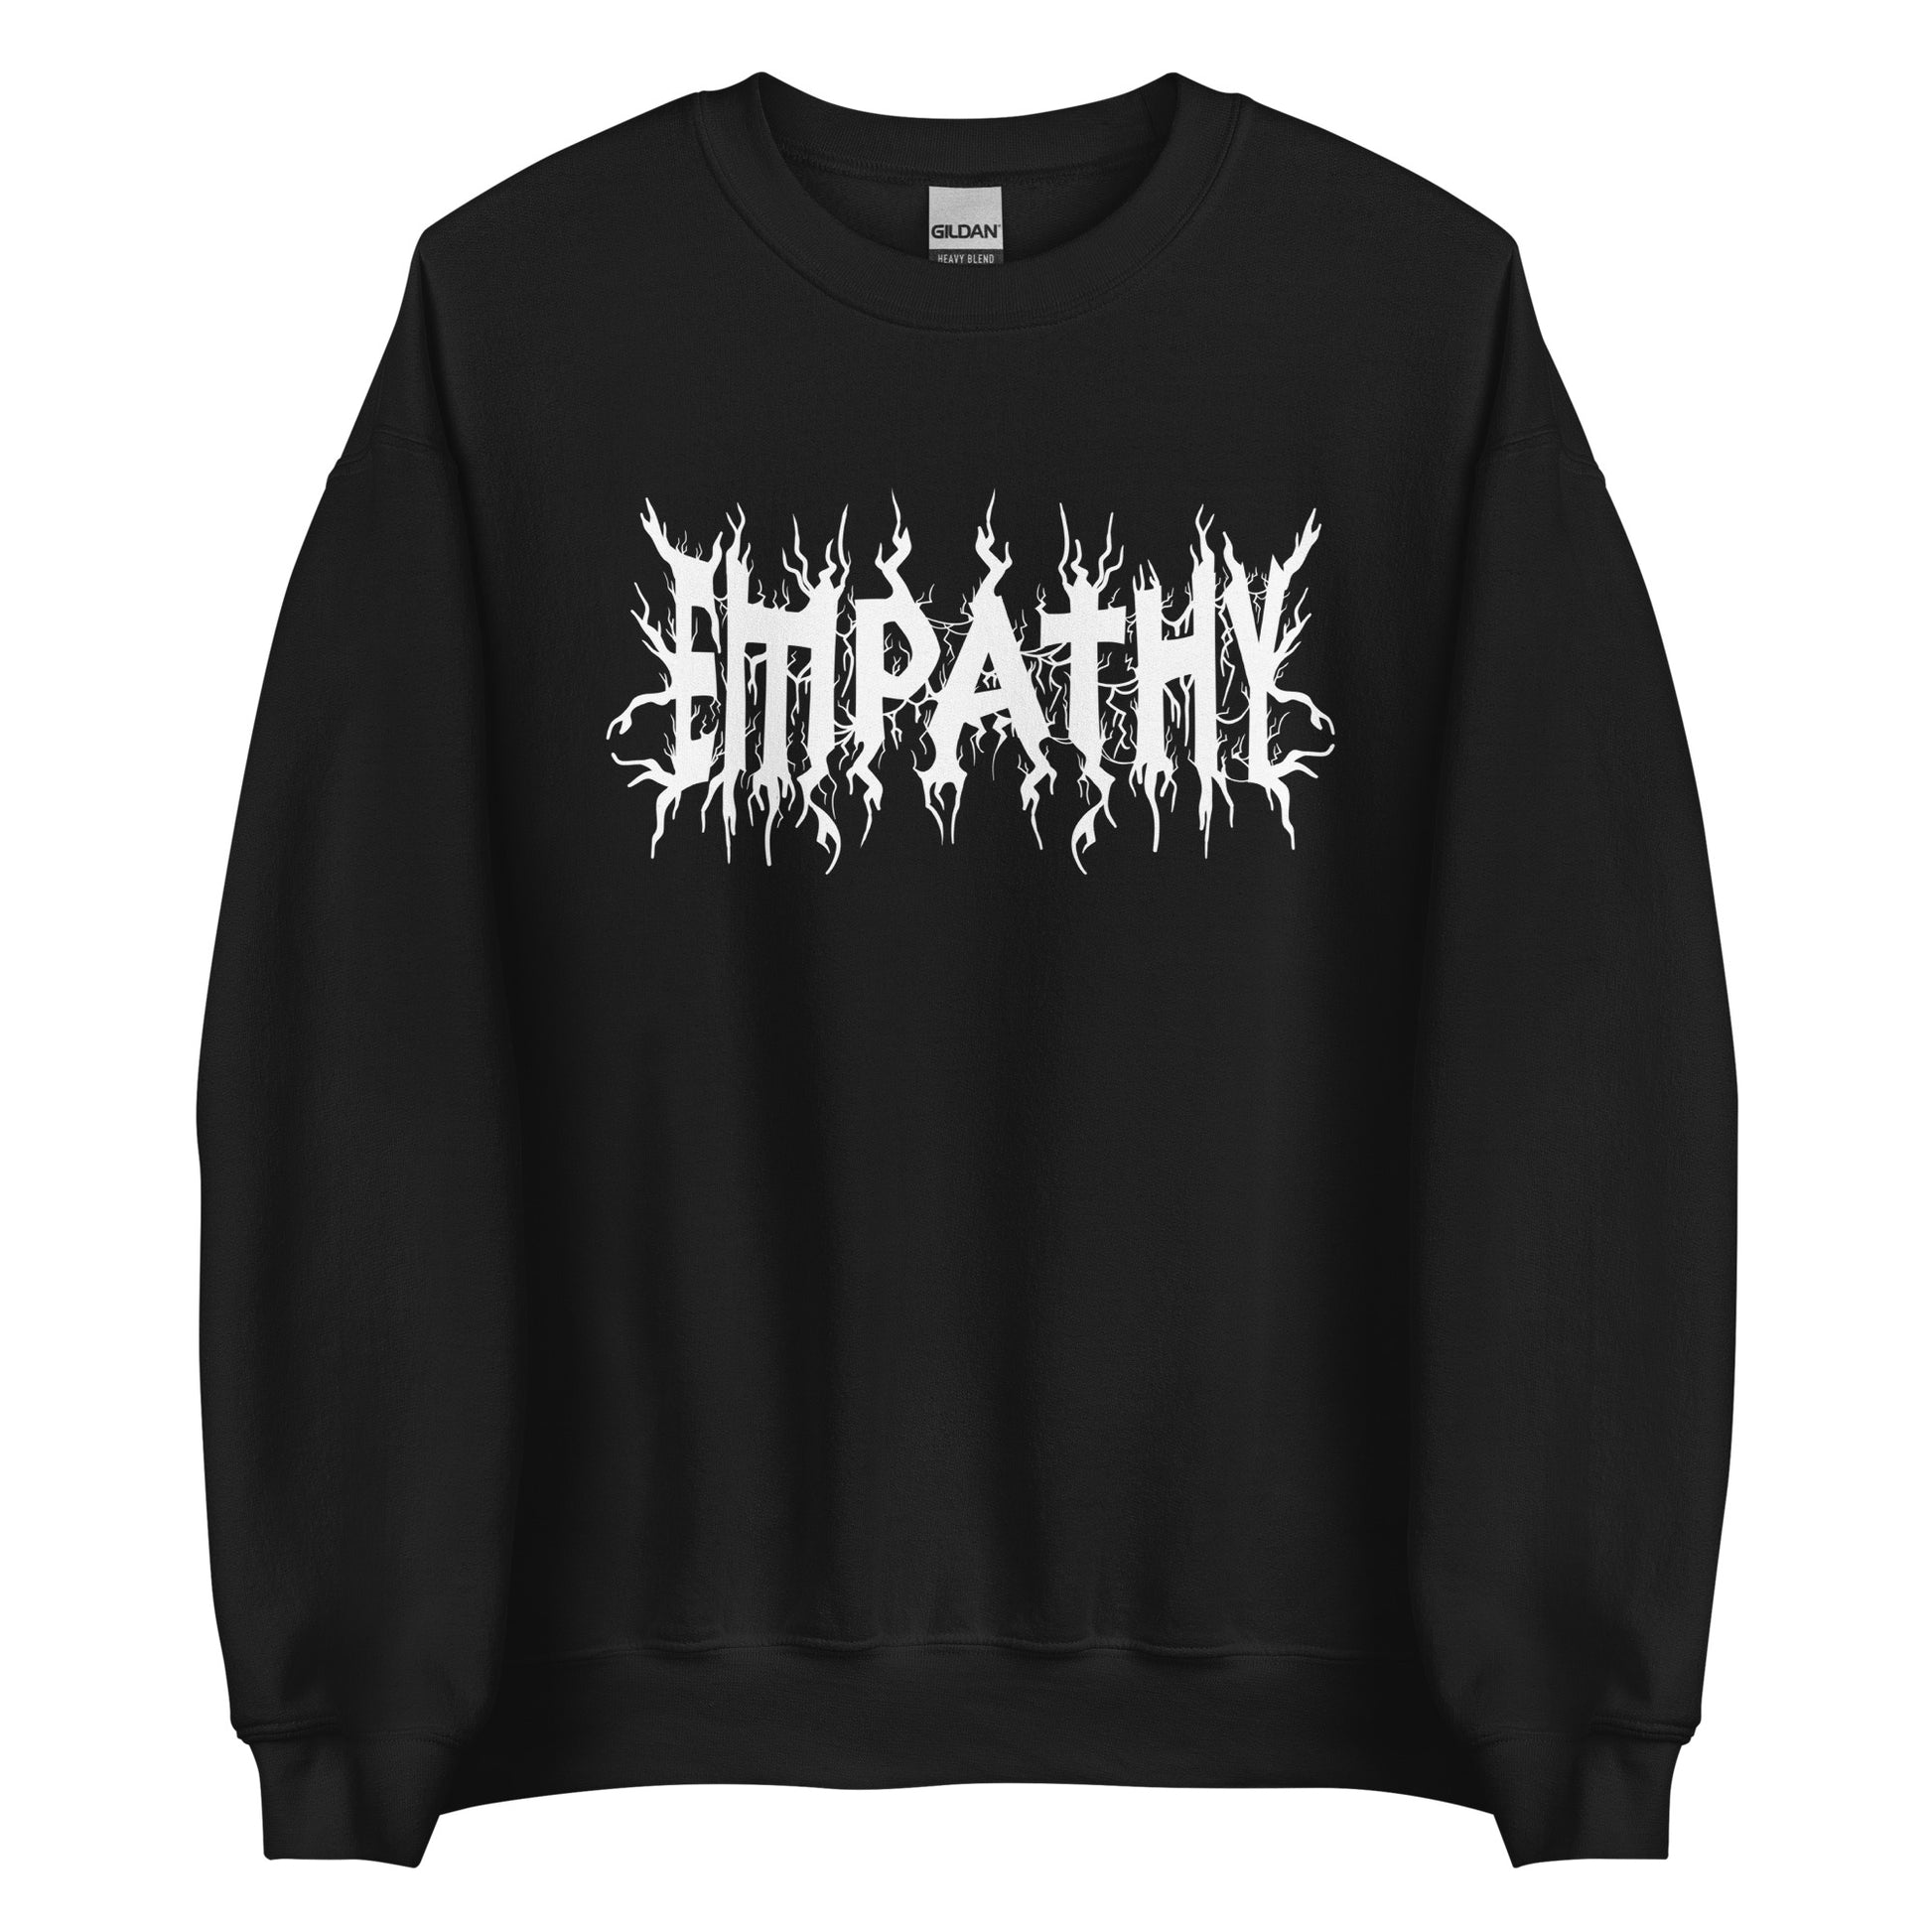 A black crewneck sweatshirt featuring white text that reads "Empathy" in a jagged font in the style of heavy metal band shirts